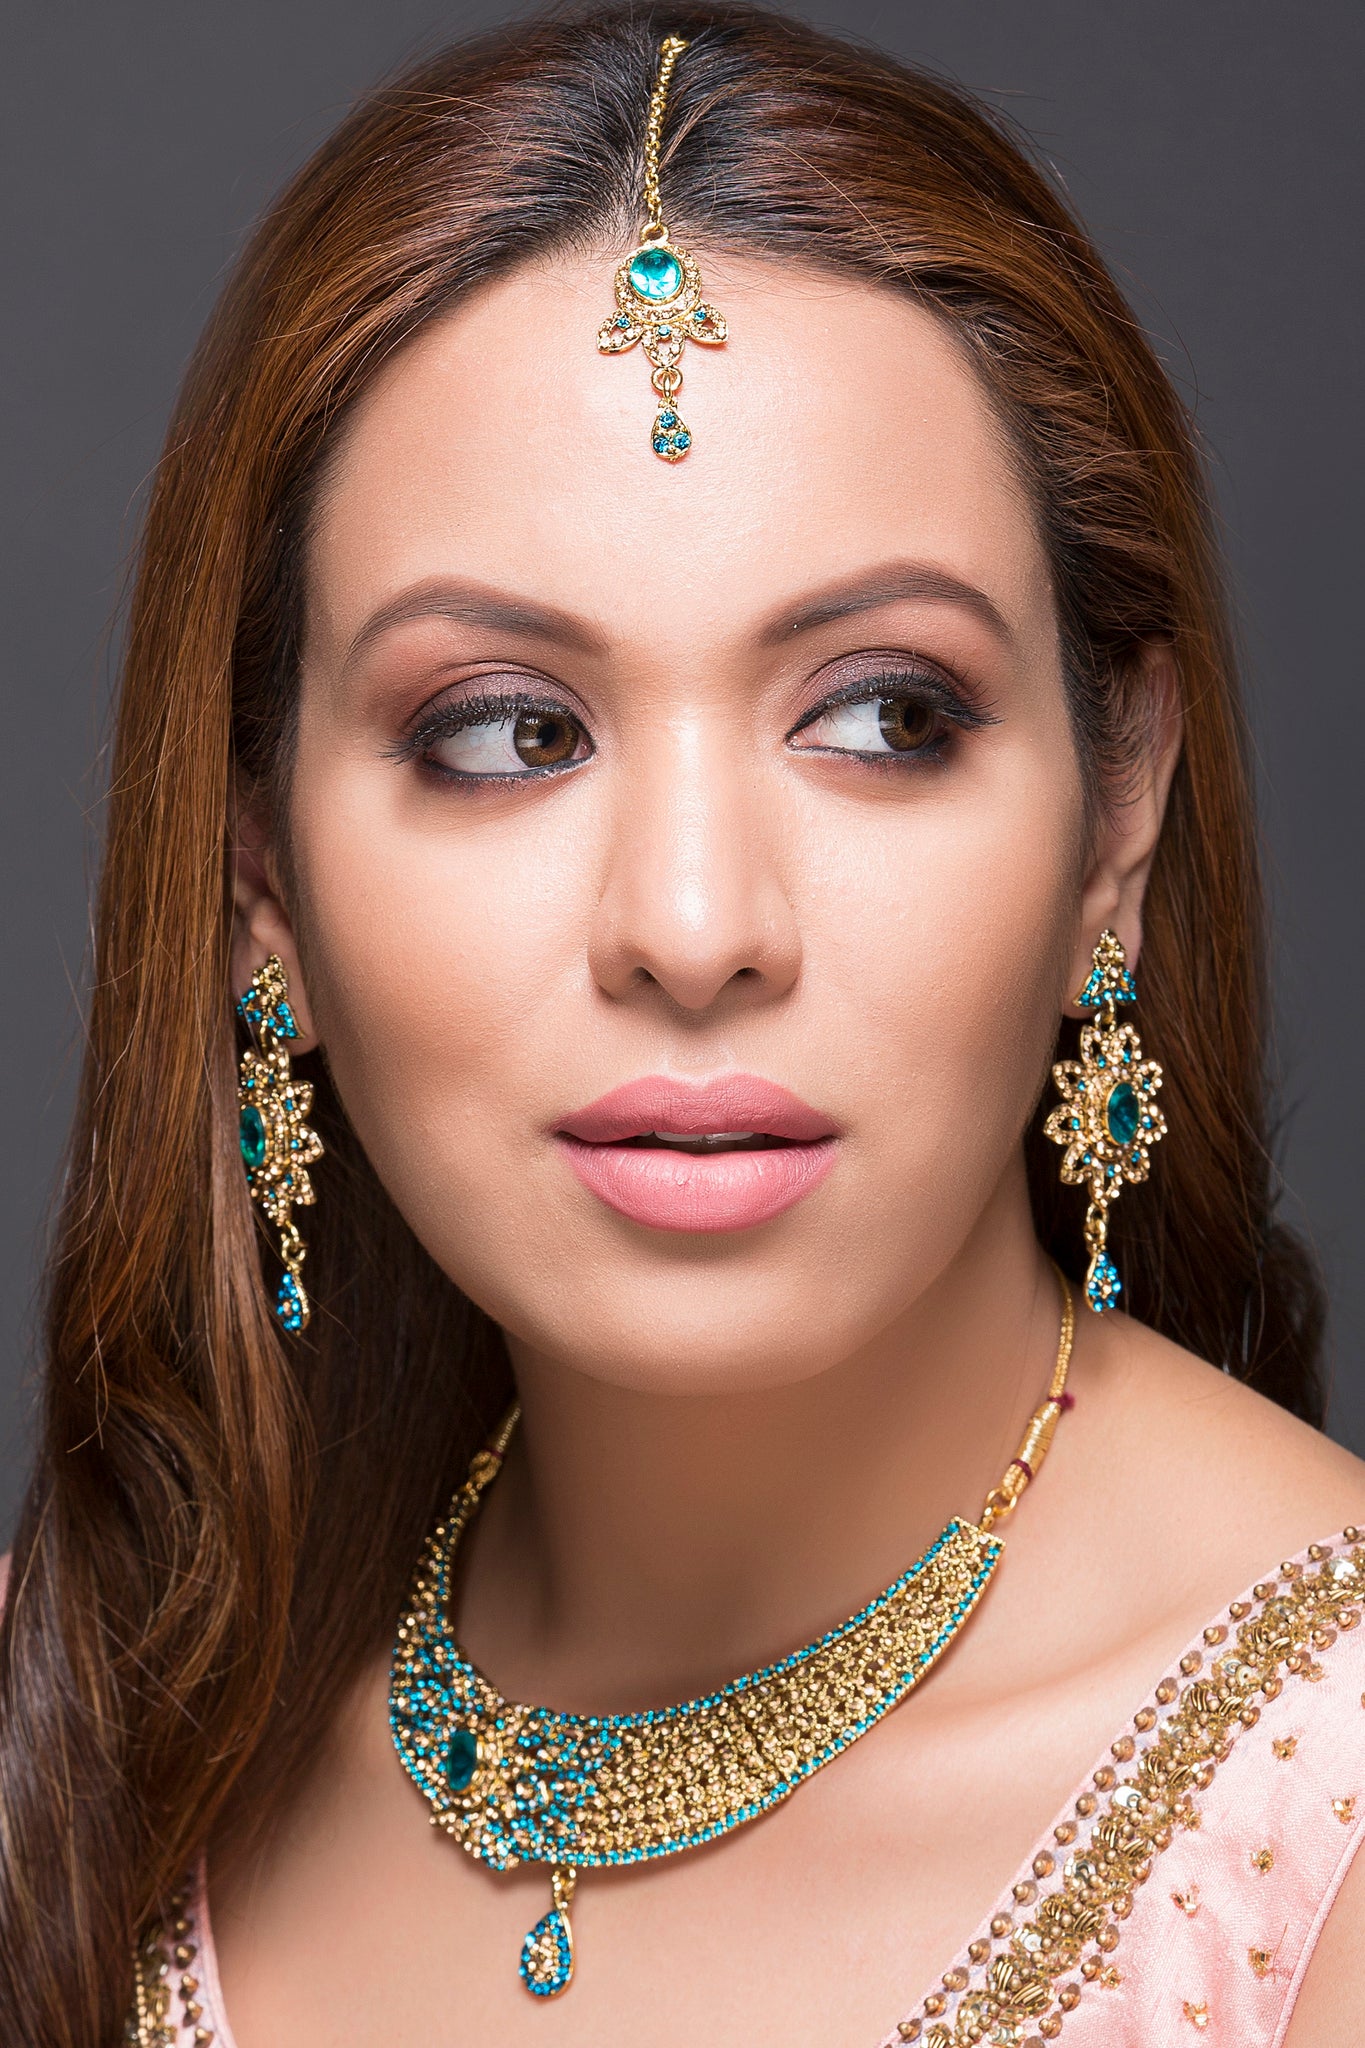 Premium Photo | Beautiful woman in a classic indian dress traditional shawl  and jewelry in national style on her